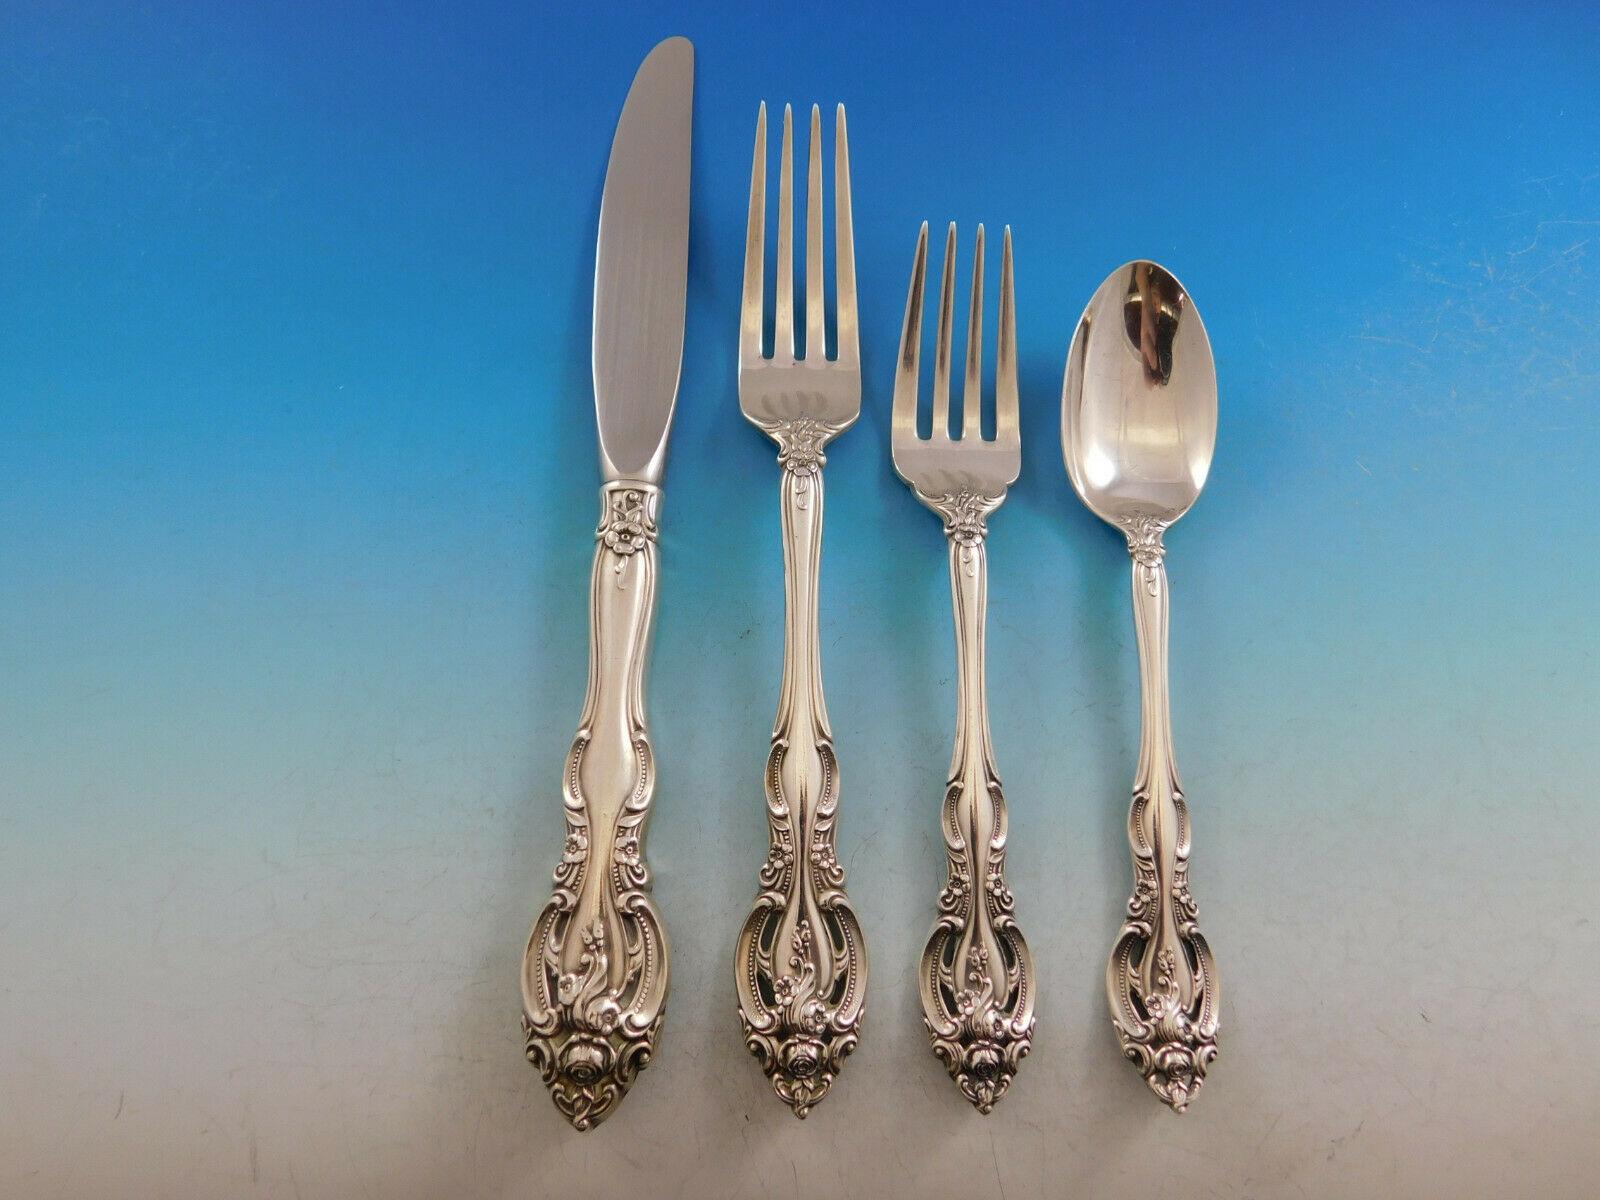 La Scala by Gorham Sterling Silver Flatware Service for 12 Set 60 pieces In Excellent Condition For Sale In Big Bend, WI